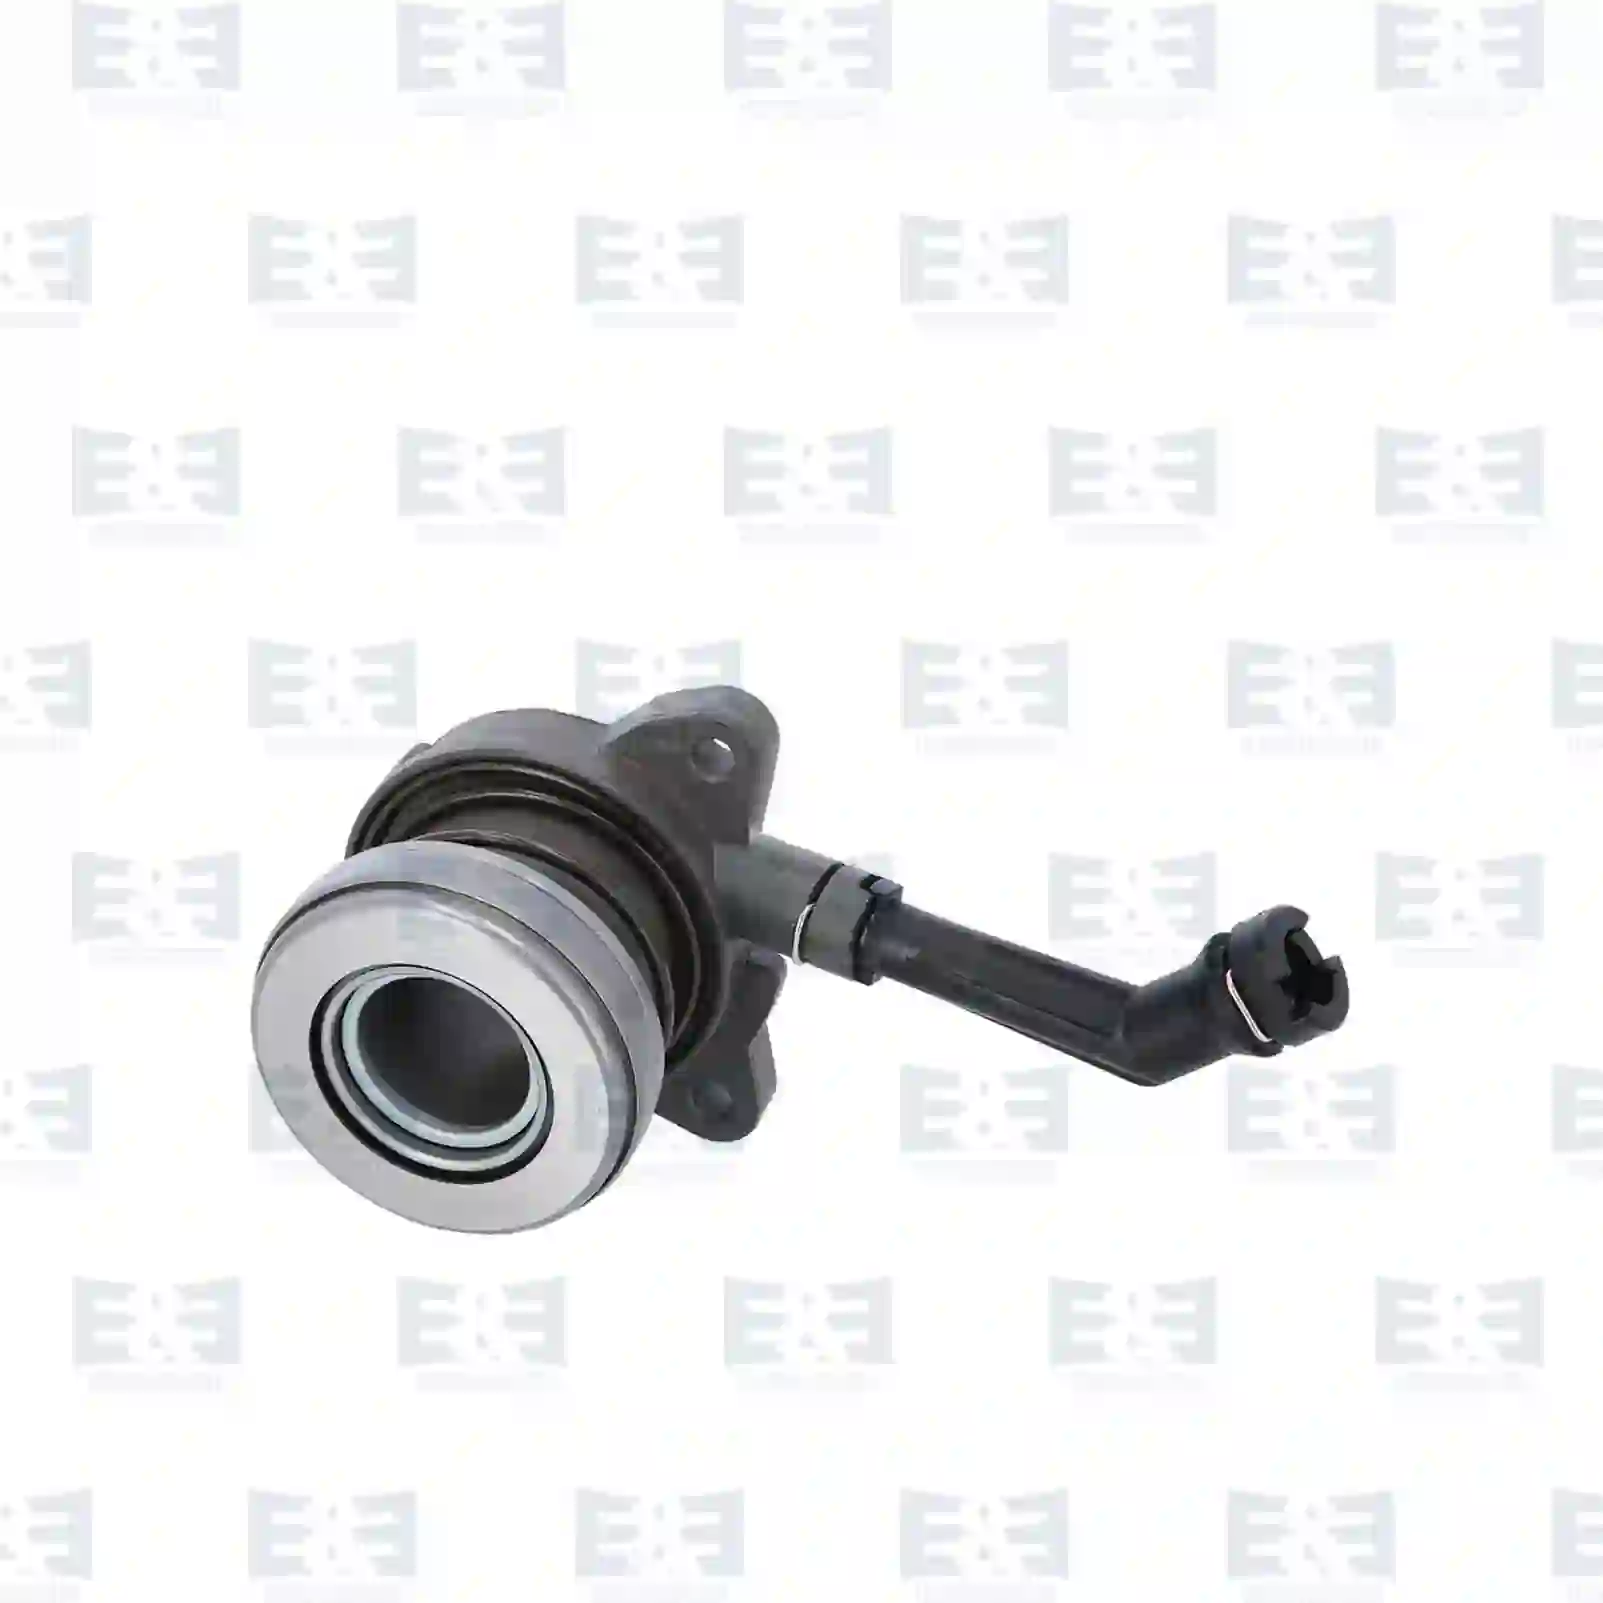  Release bearing || E&E Truck Spare Parts | Truck Spare Parts, Auotomotive Spare Parts